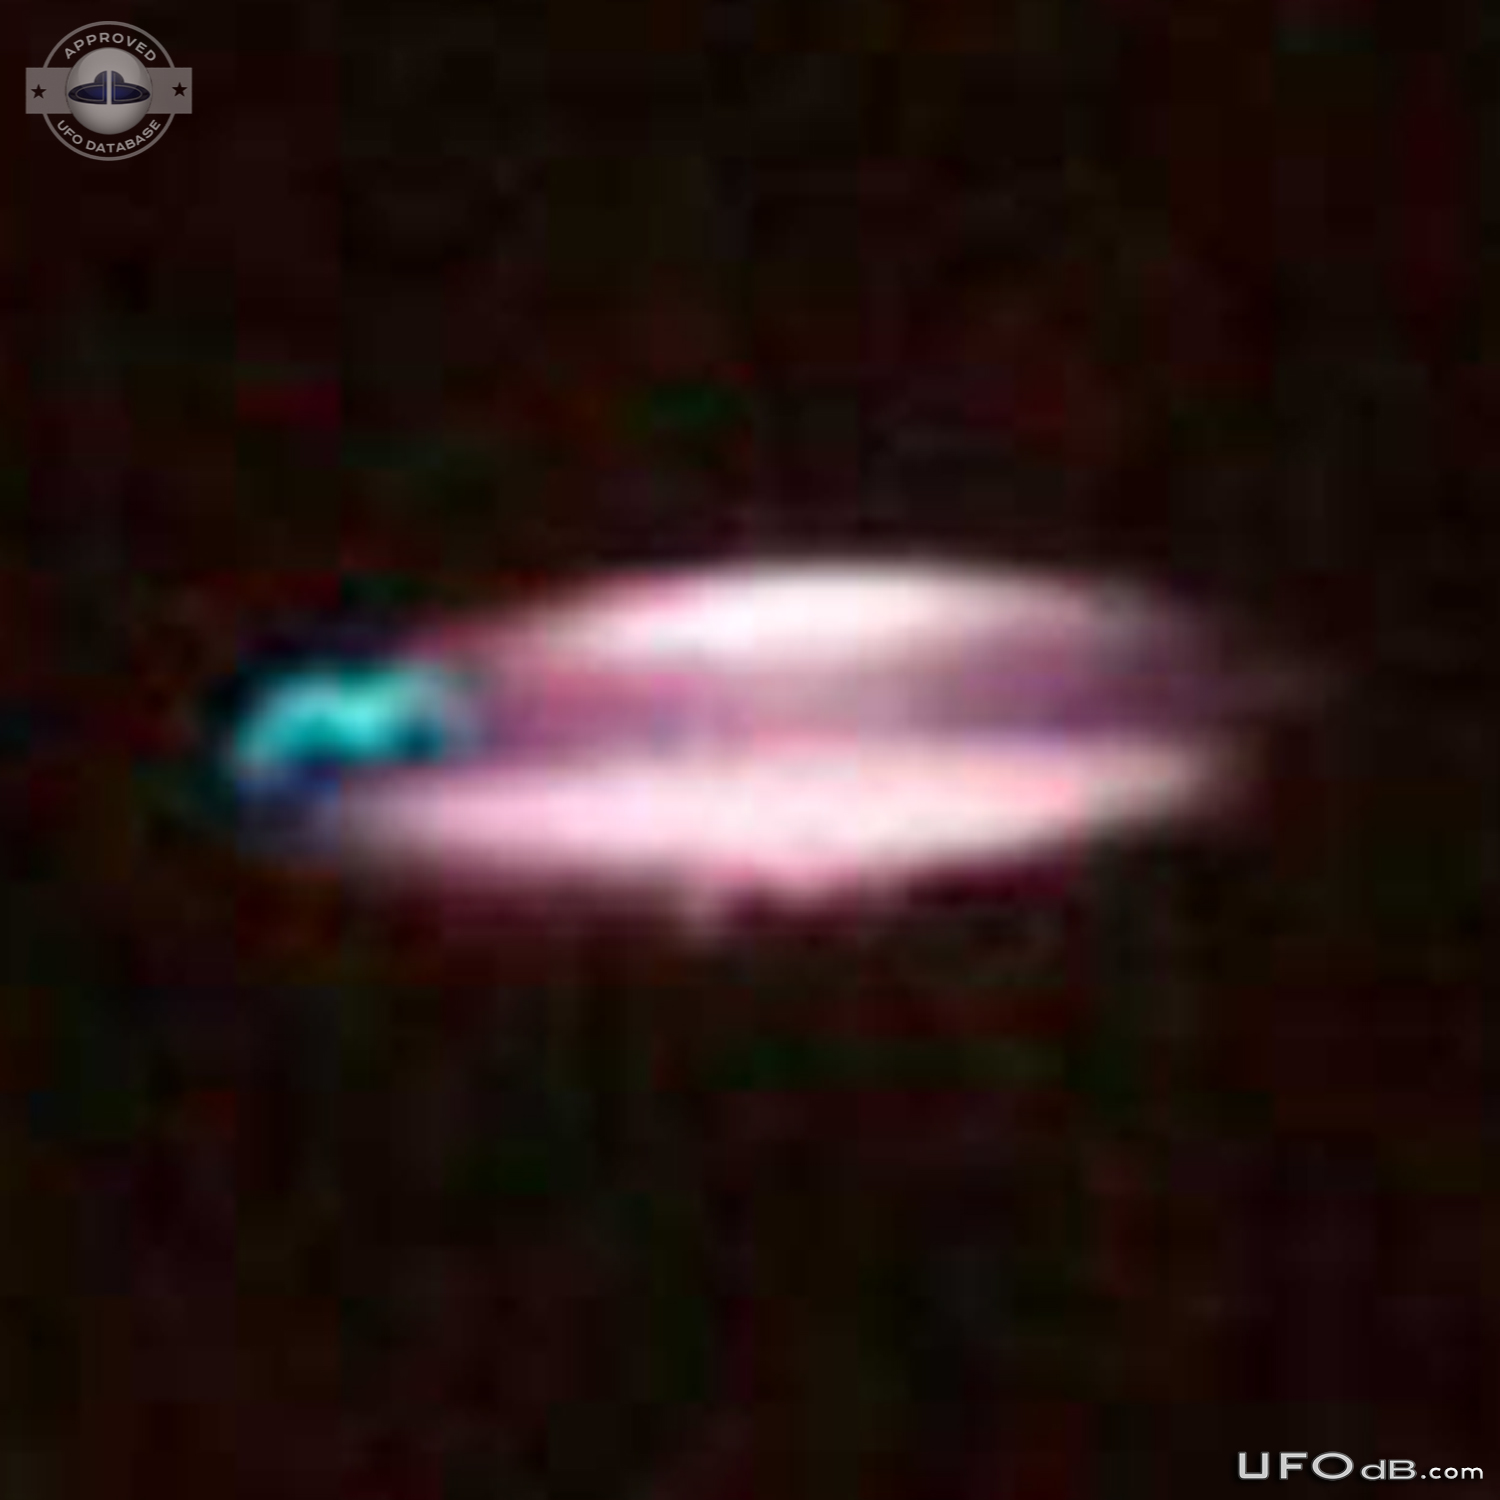 Clear Picture of UFO taken in the night Los Angeles, California | 2012 UFO Picture #397-4